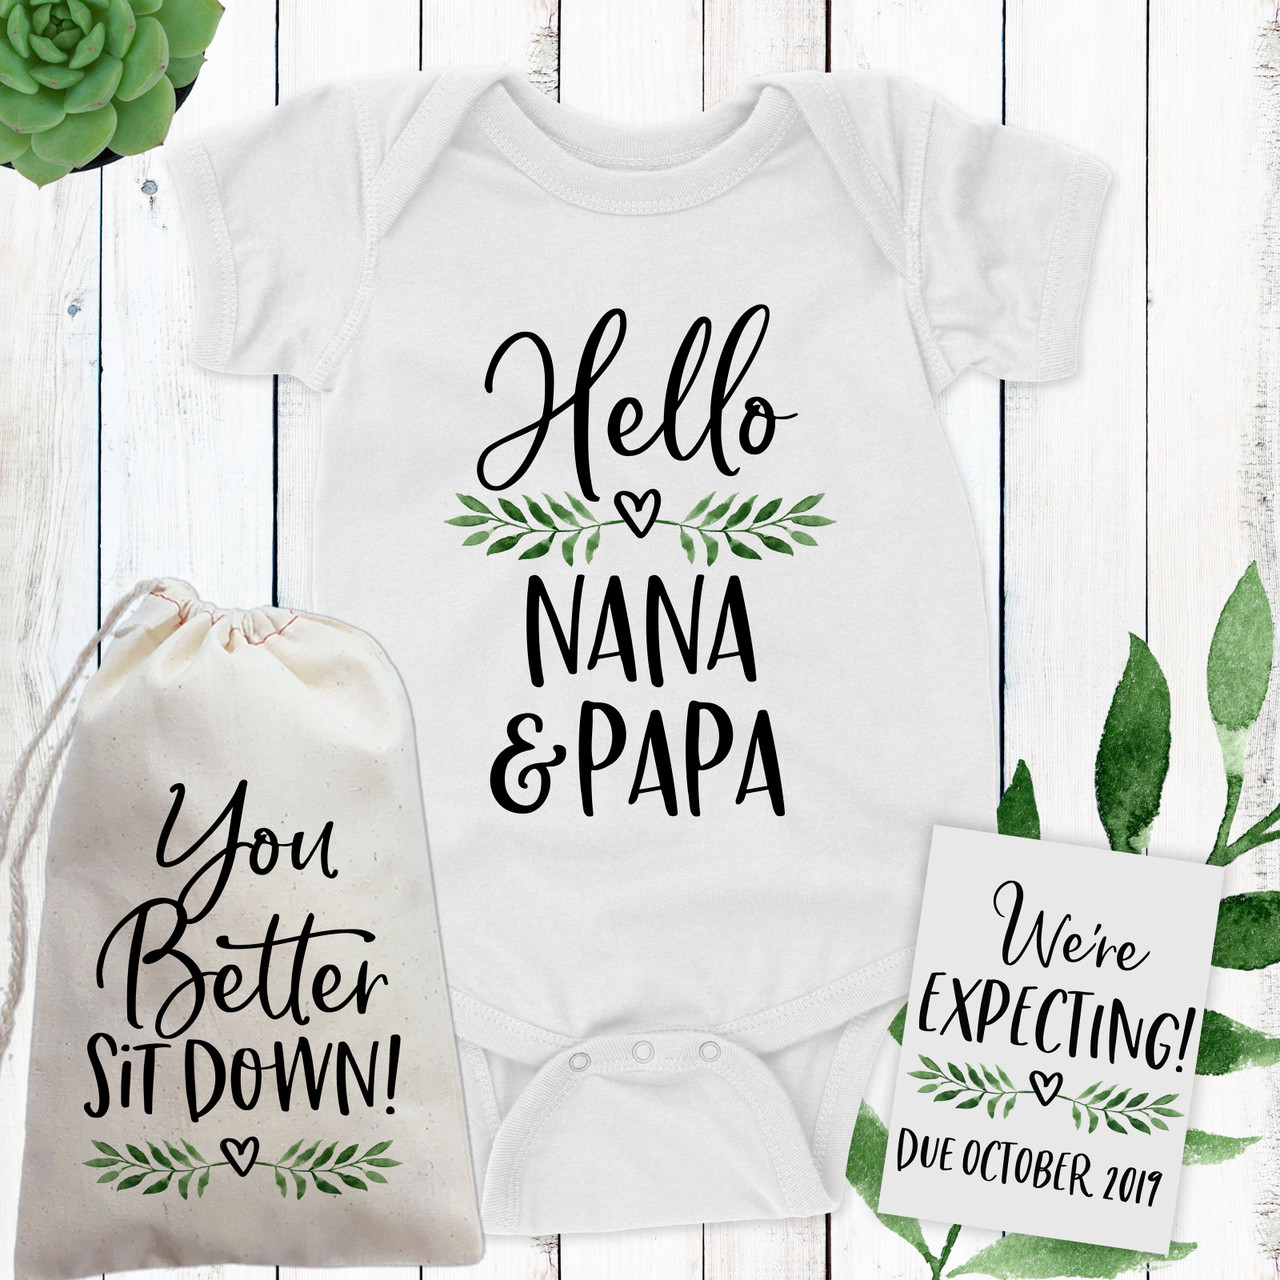 Pregnancy Announcement Onesie - Custom Baby Clothes - Baby Coming Soon Custom Onesie - Personalized Baby Clothes - Cute Baby Onesie 0-3 Months